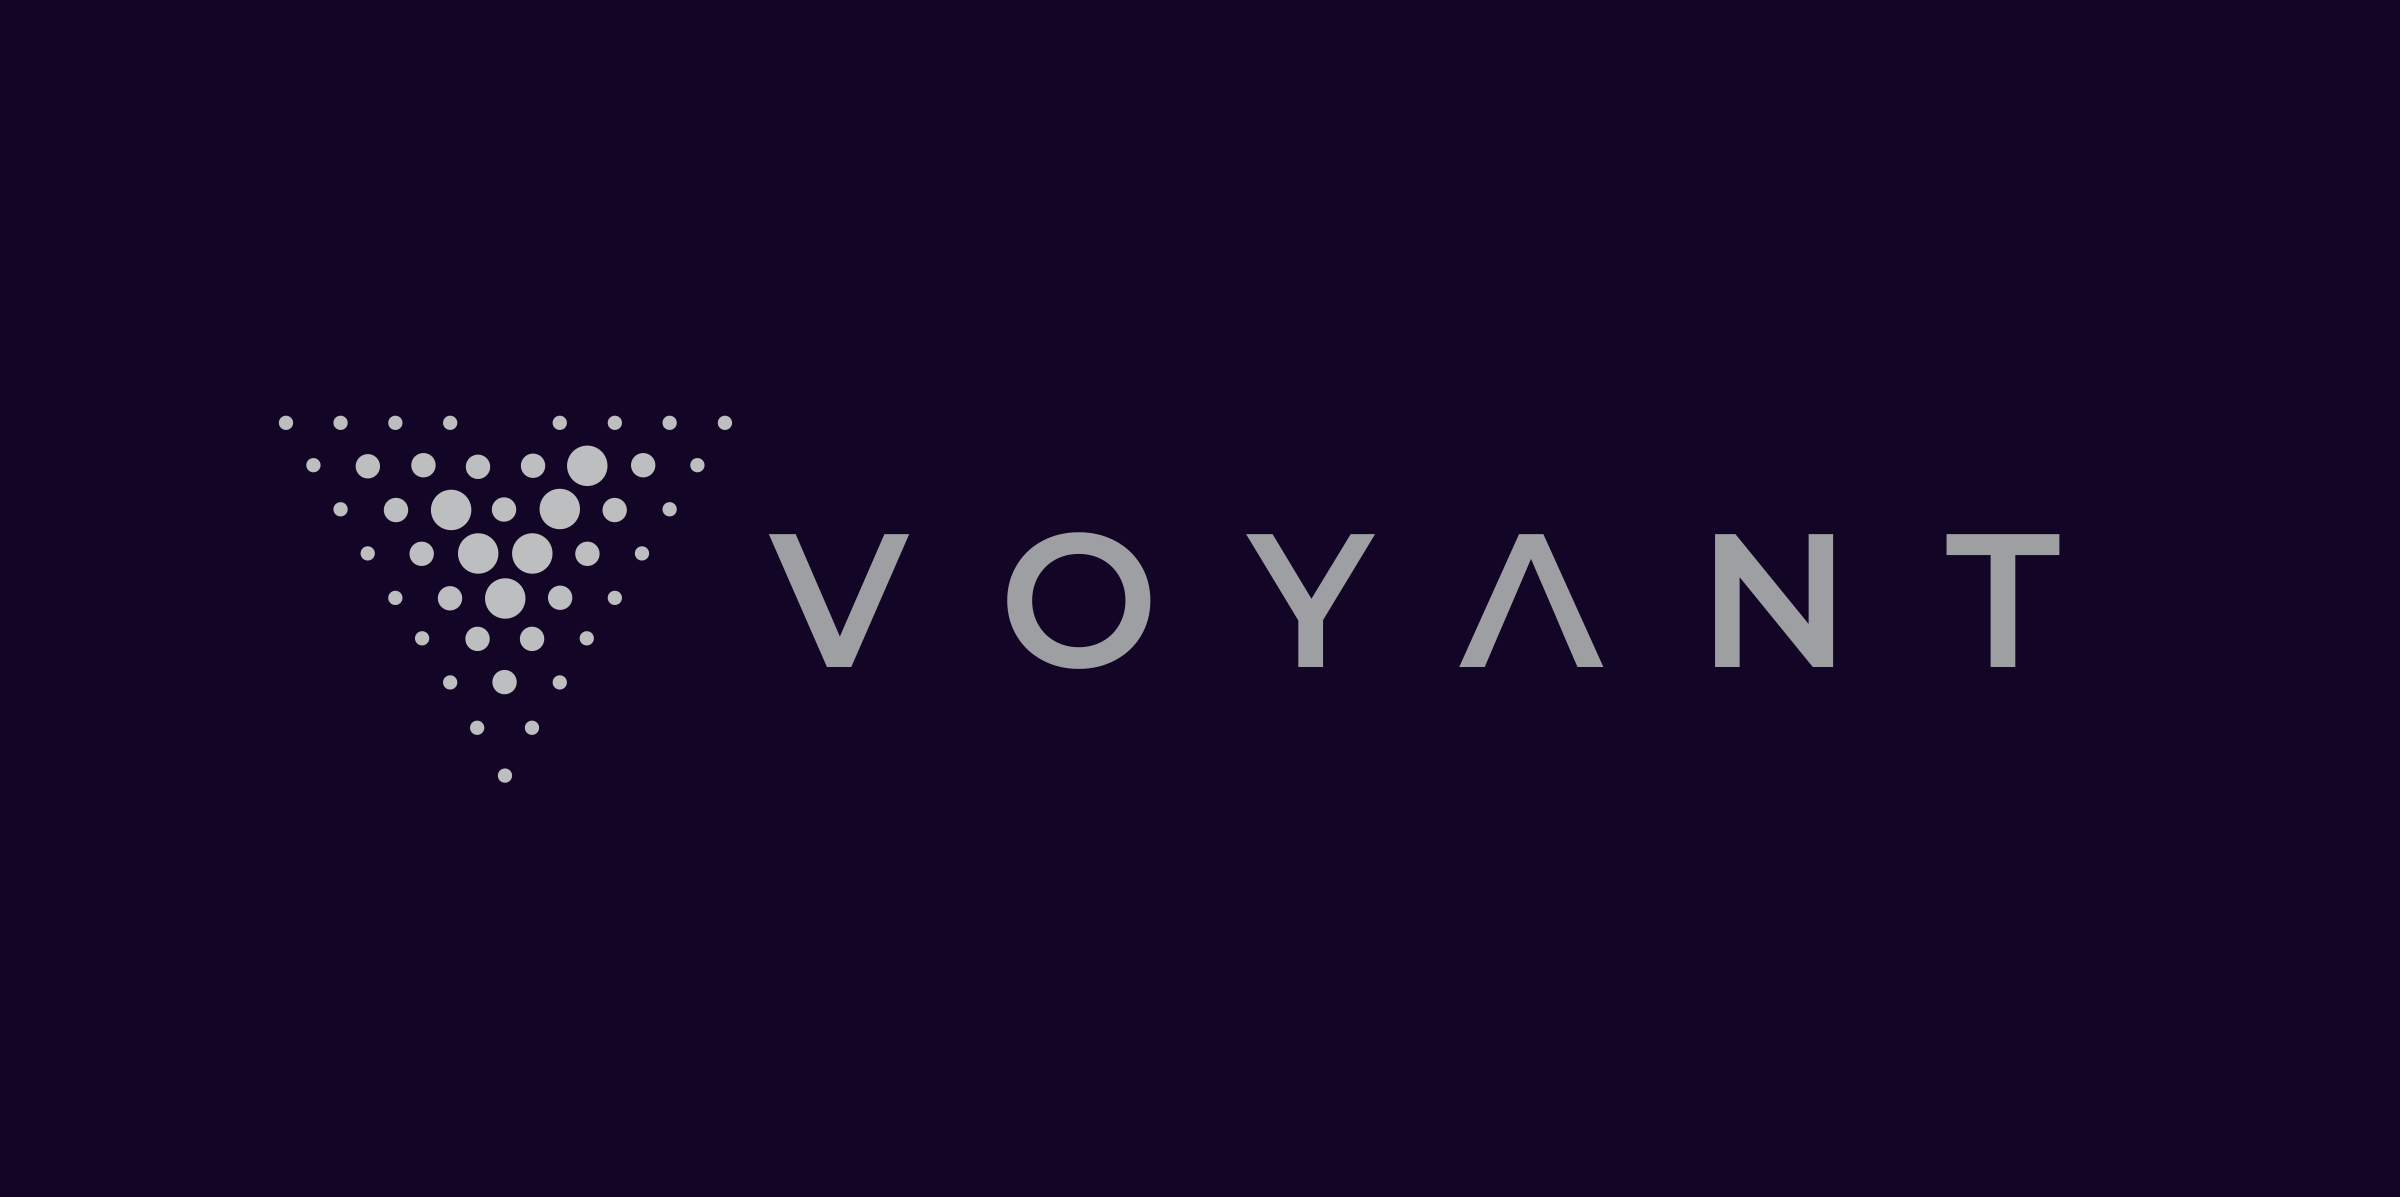 Voyant - Taction Software